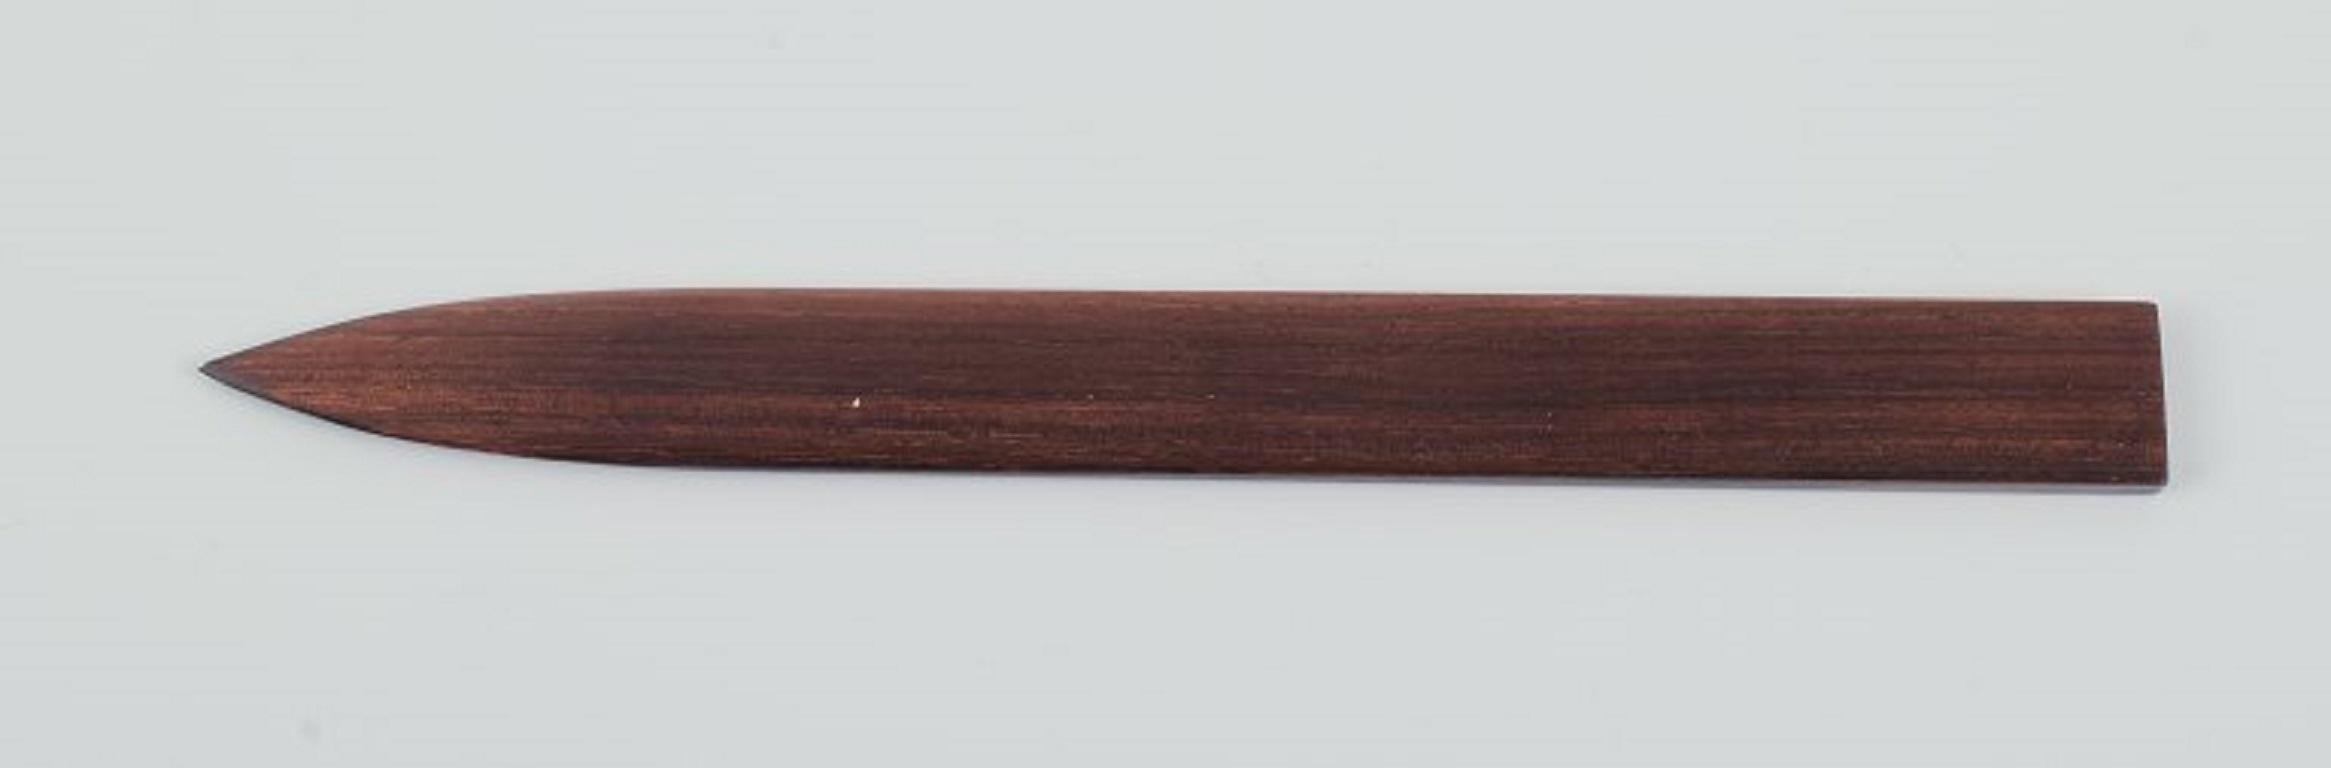 Scandinavian Modern Hans Hansen, Letter Knife in Rosewood with Silver Inlay, 1960s For Sale